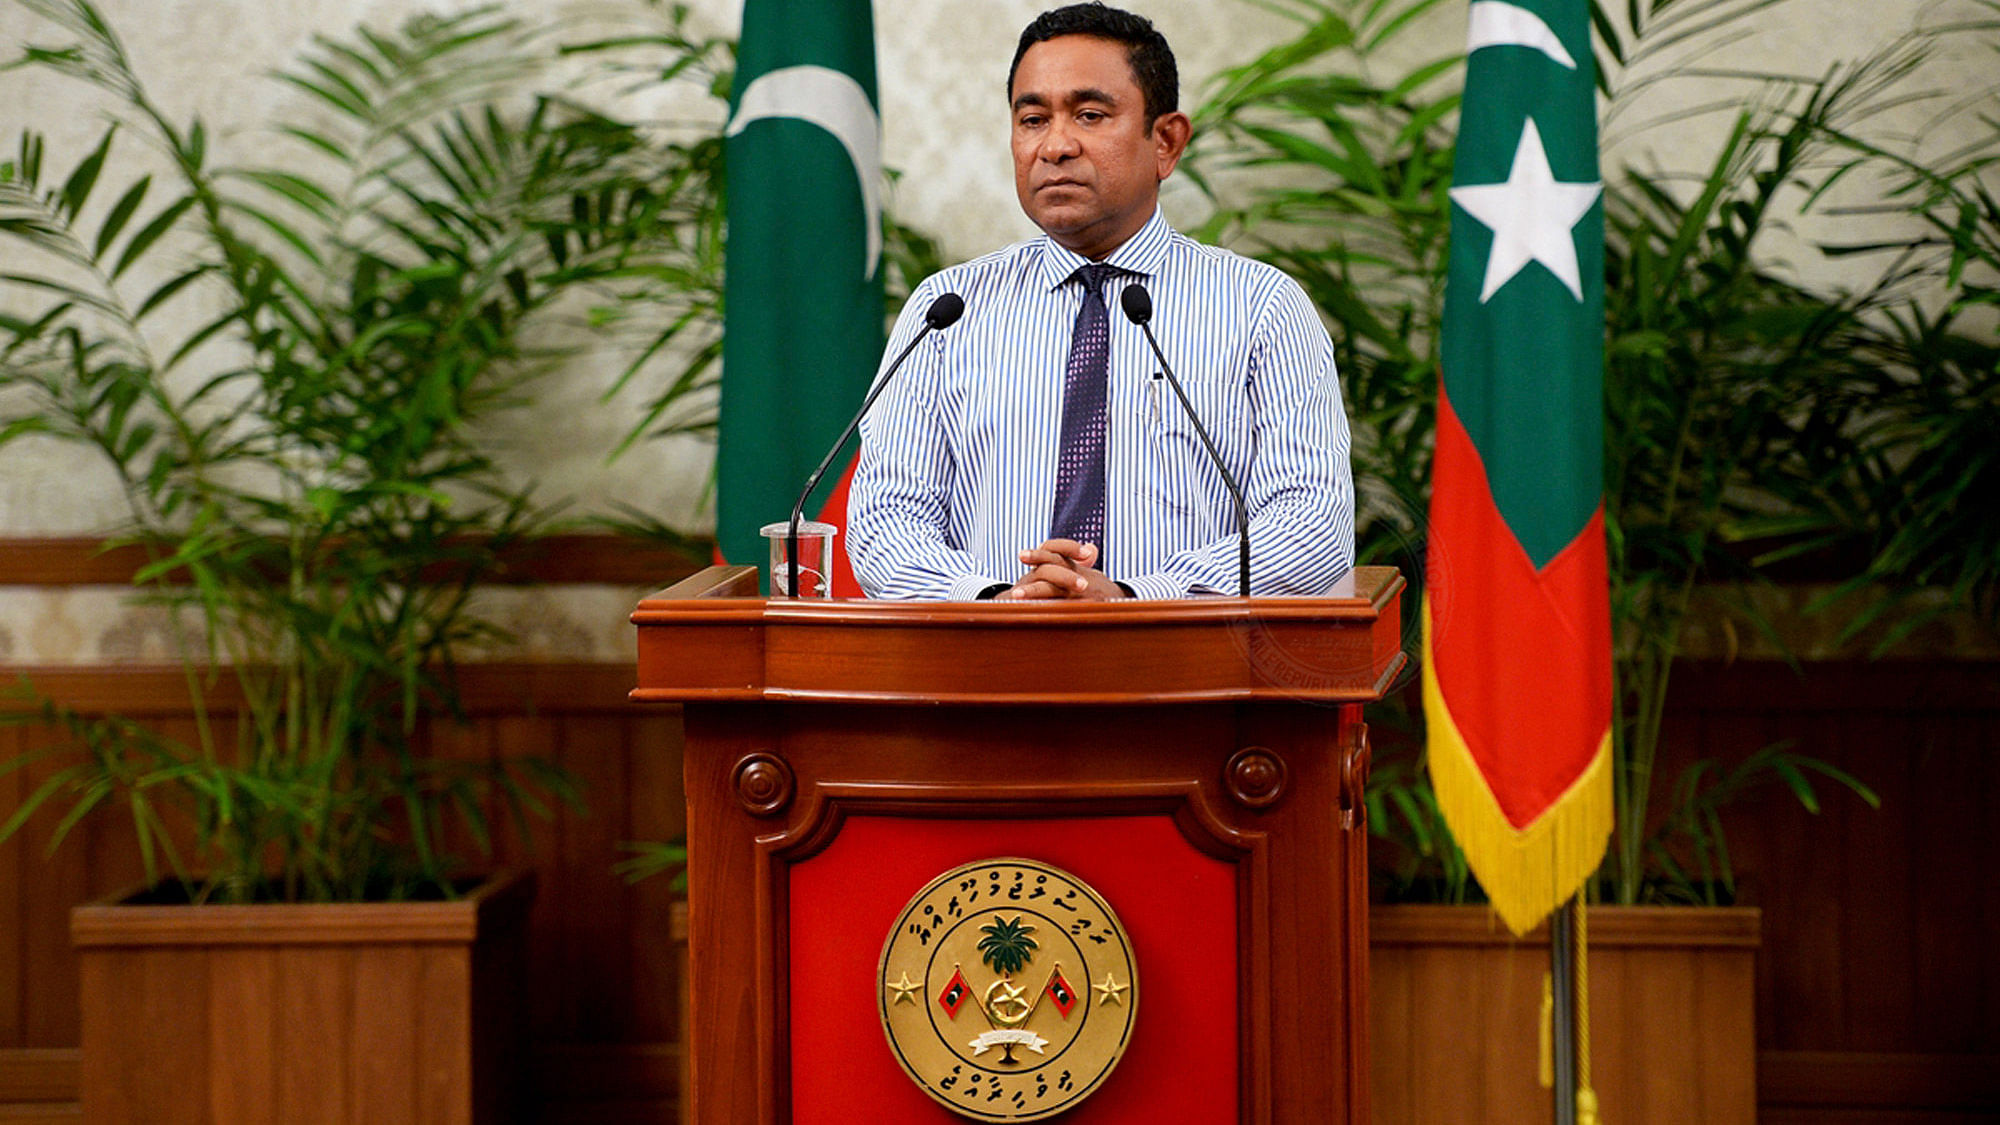 File photo of Maldives President Abdulla Yameen addressing the nation in Male, Maldives.